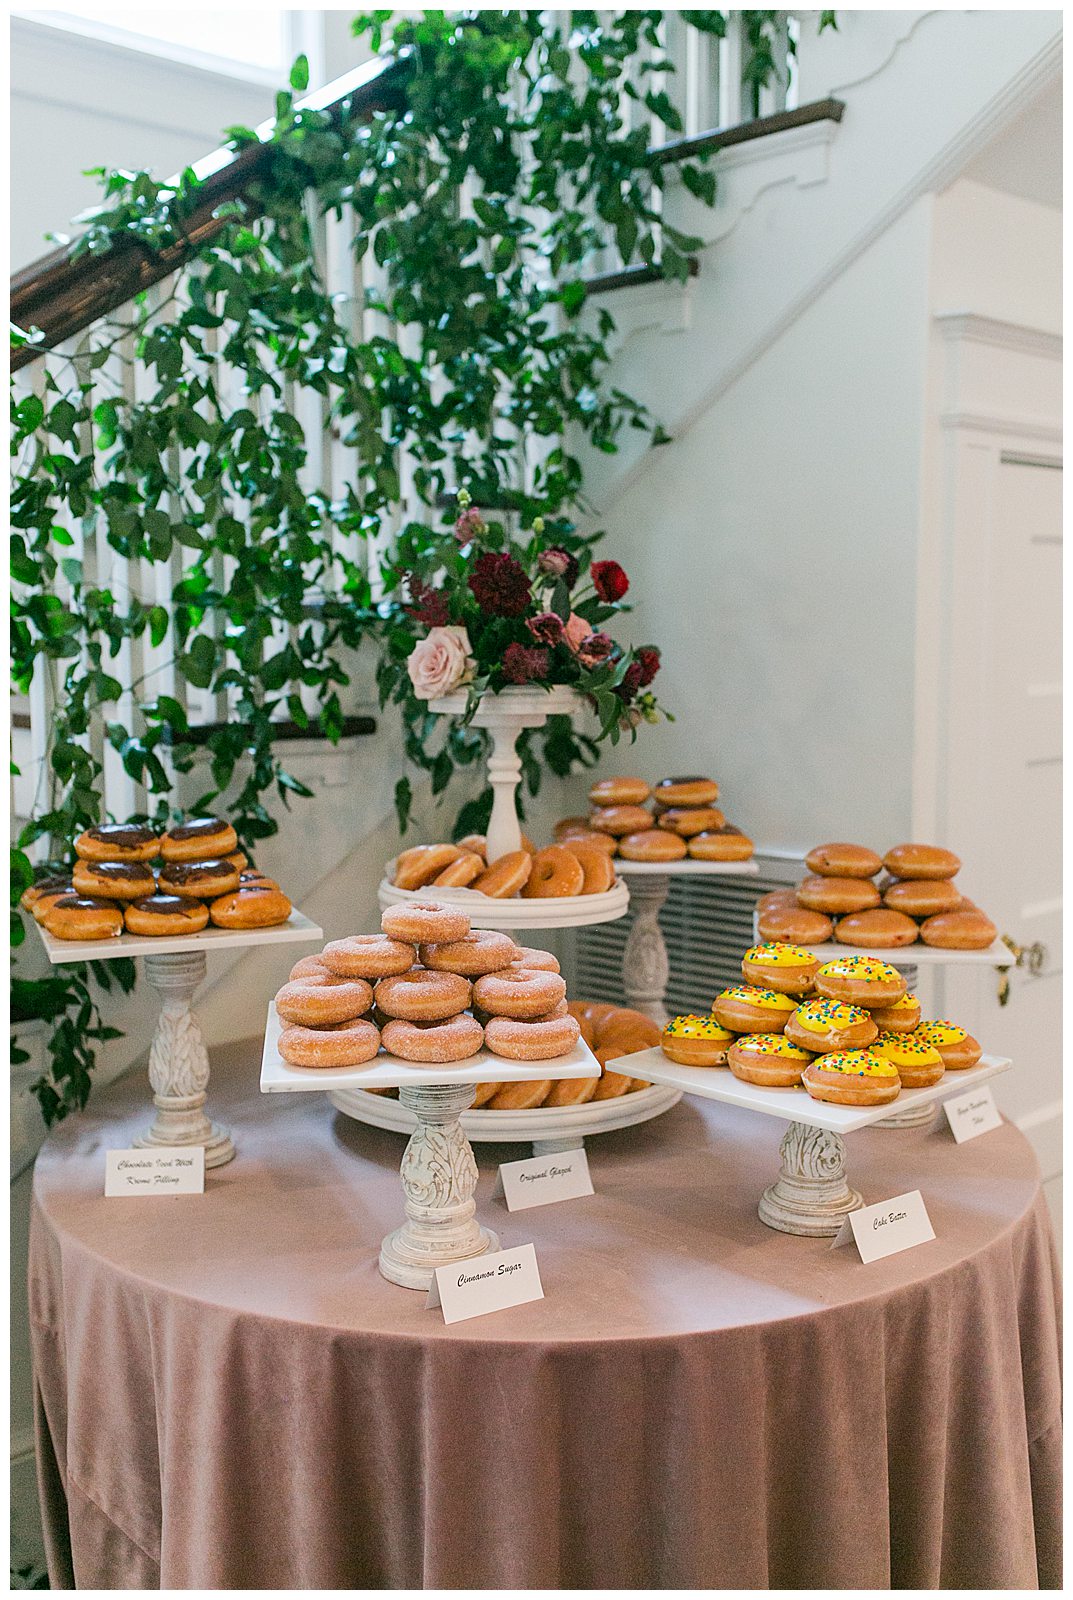 Bride and groom opt for donuts instead of wedding cake